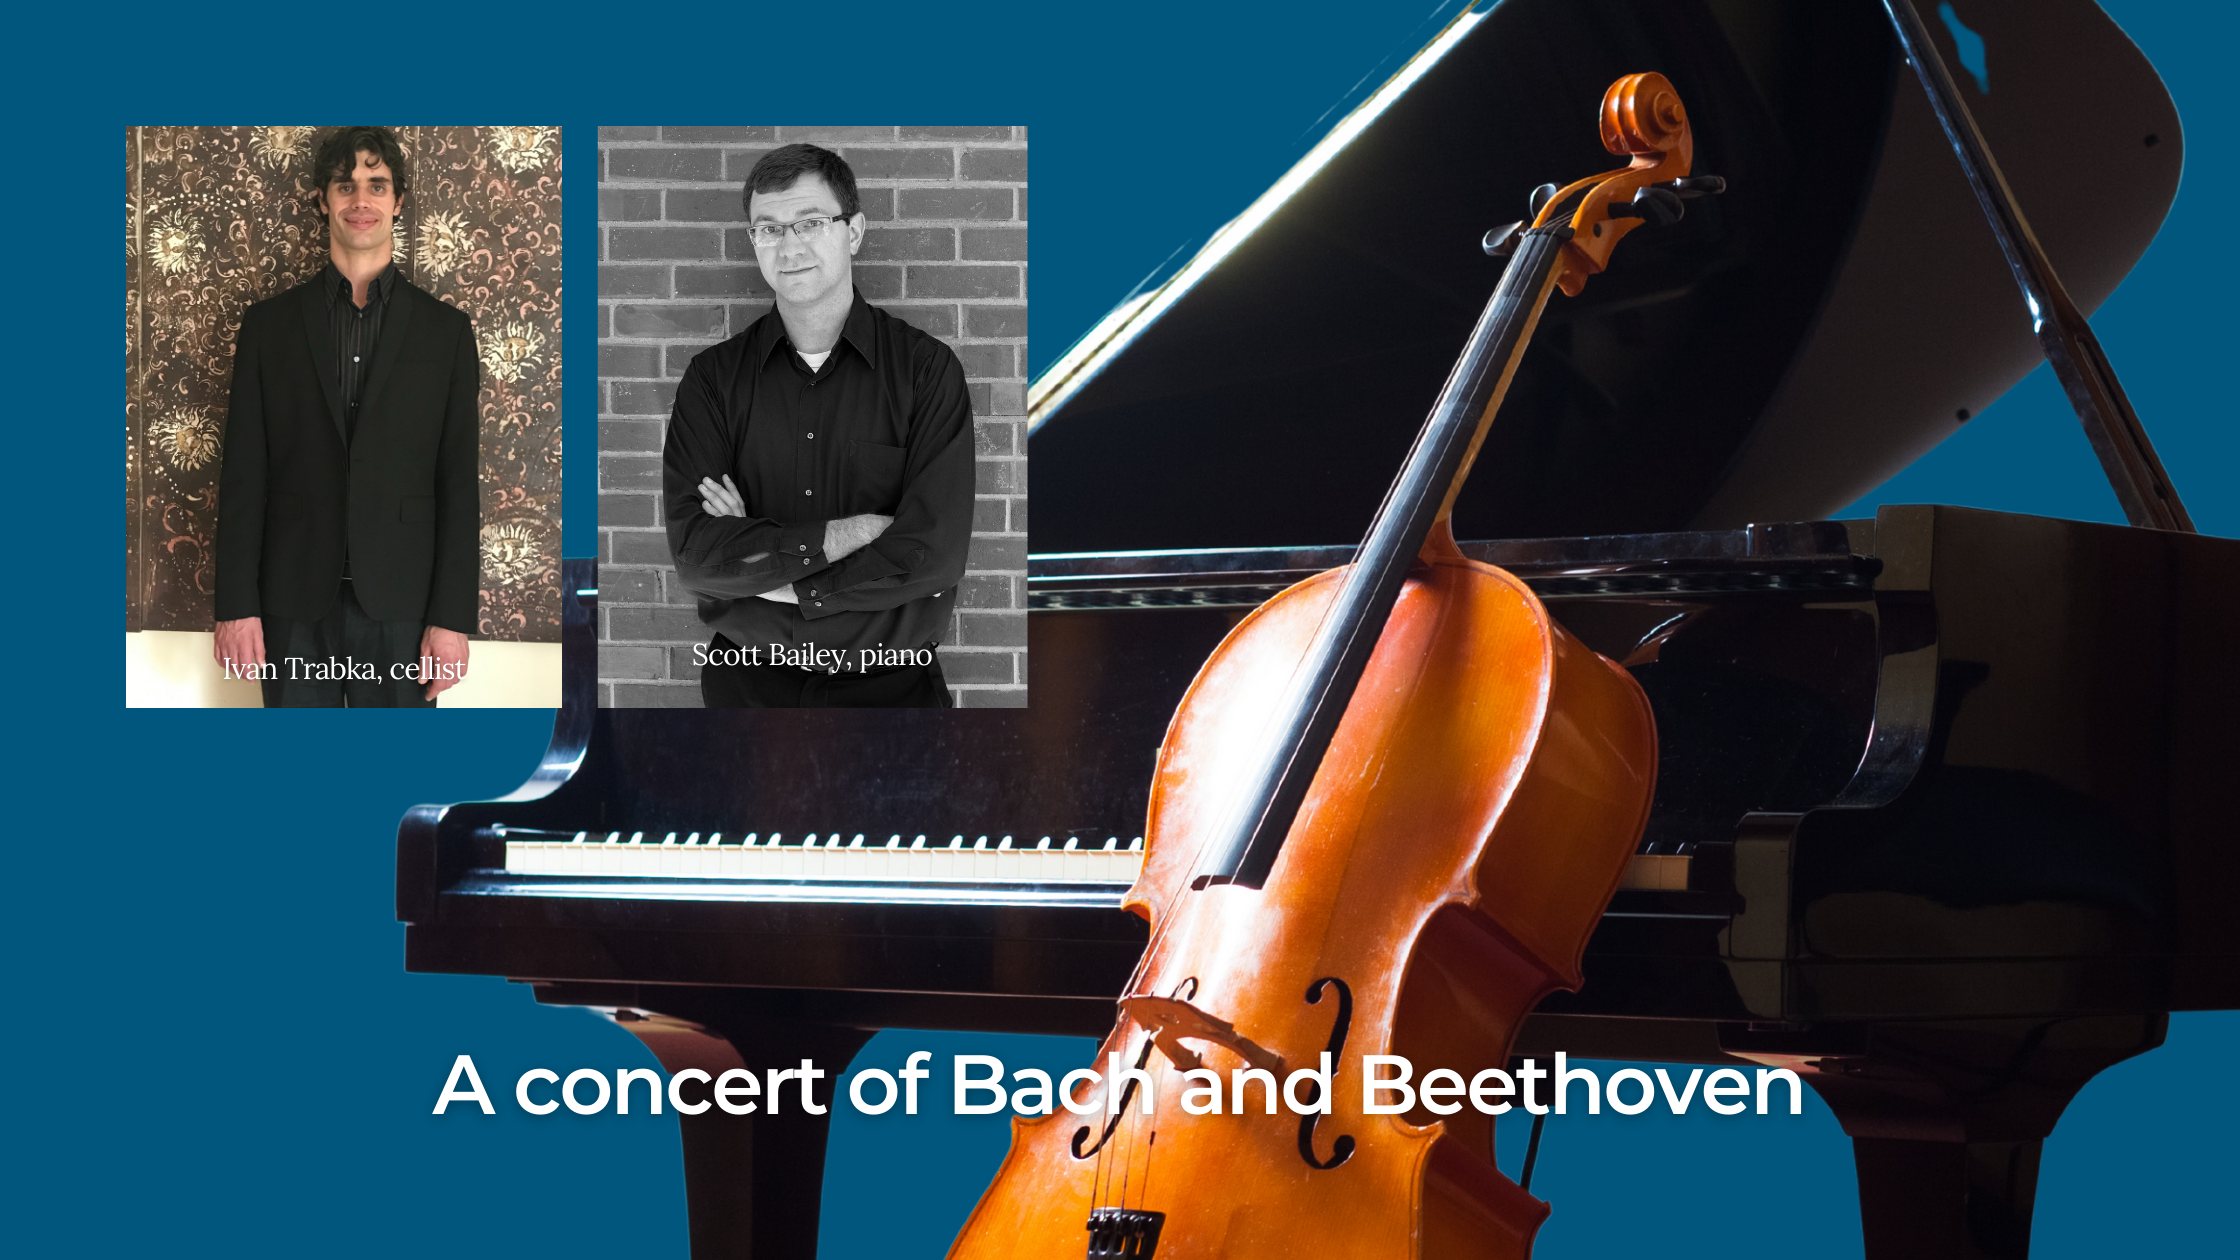 NEW DATE! A Concert of Bach and Beethoven